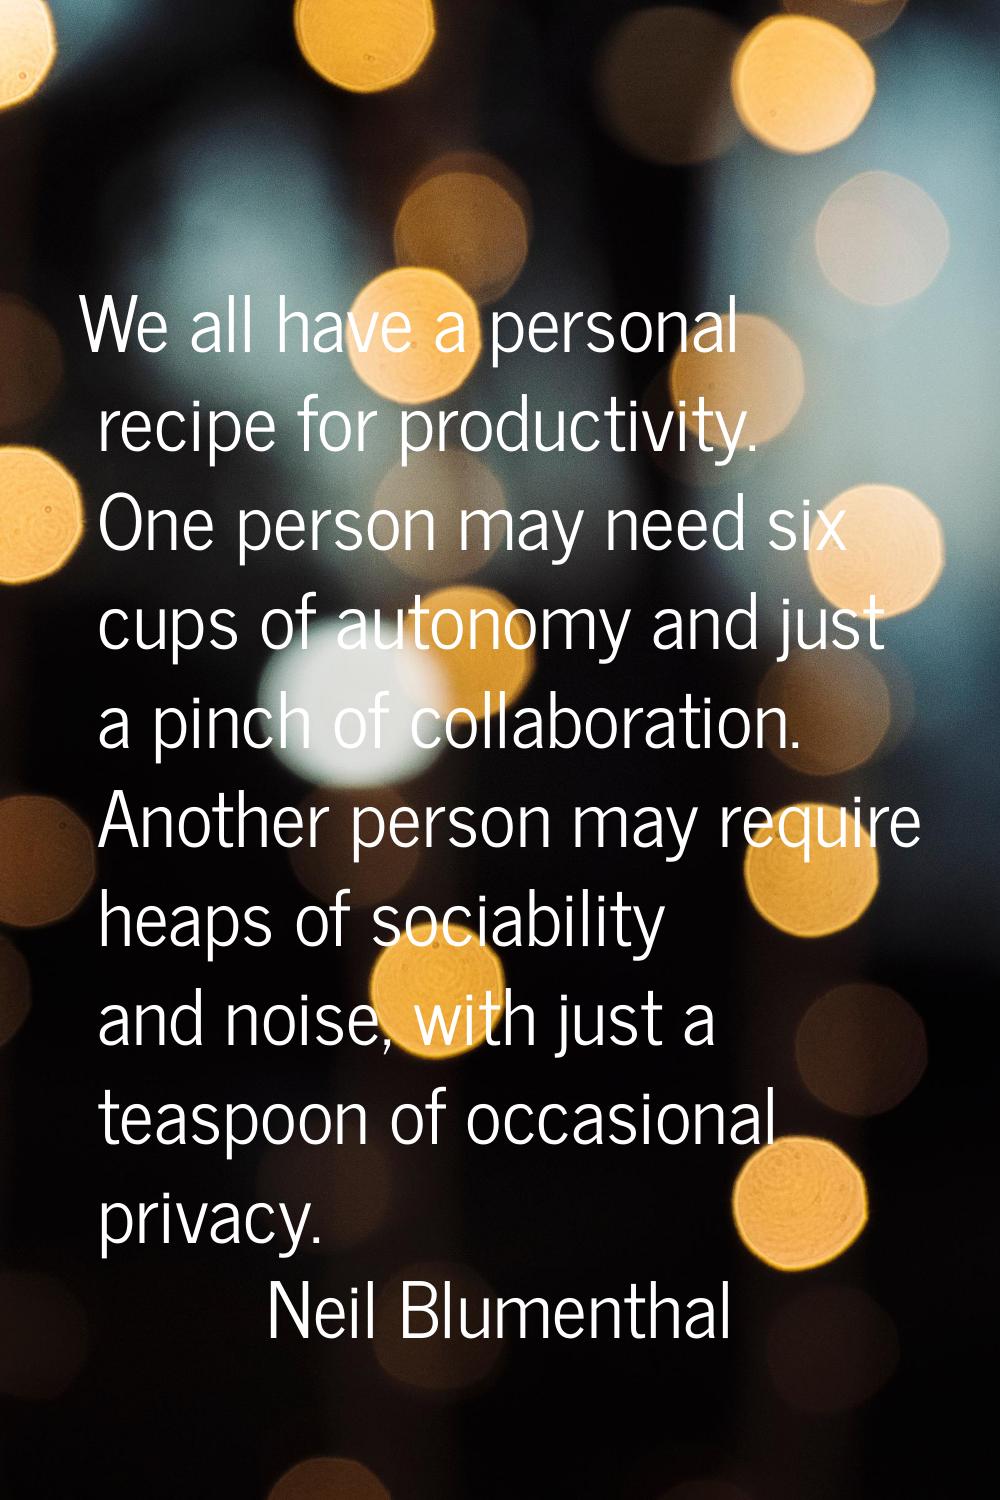 We all have a personal recipe for productivity. One person may need six cups of autonomy and just a